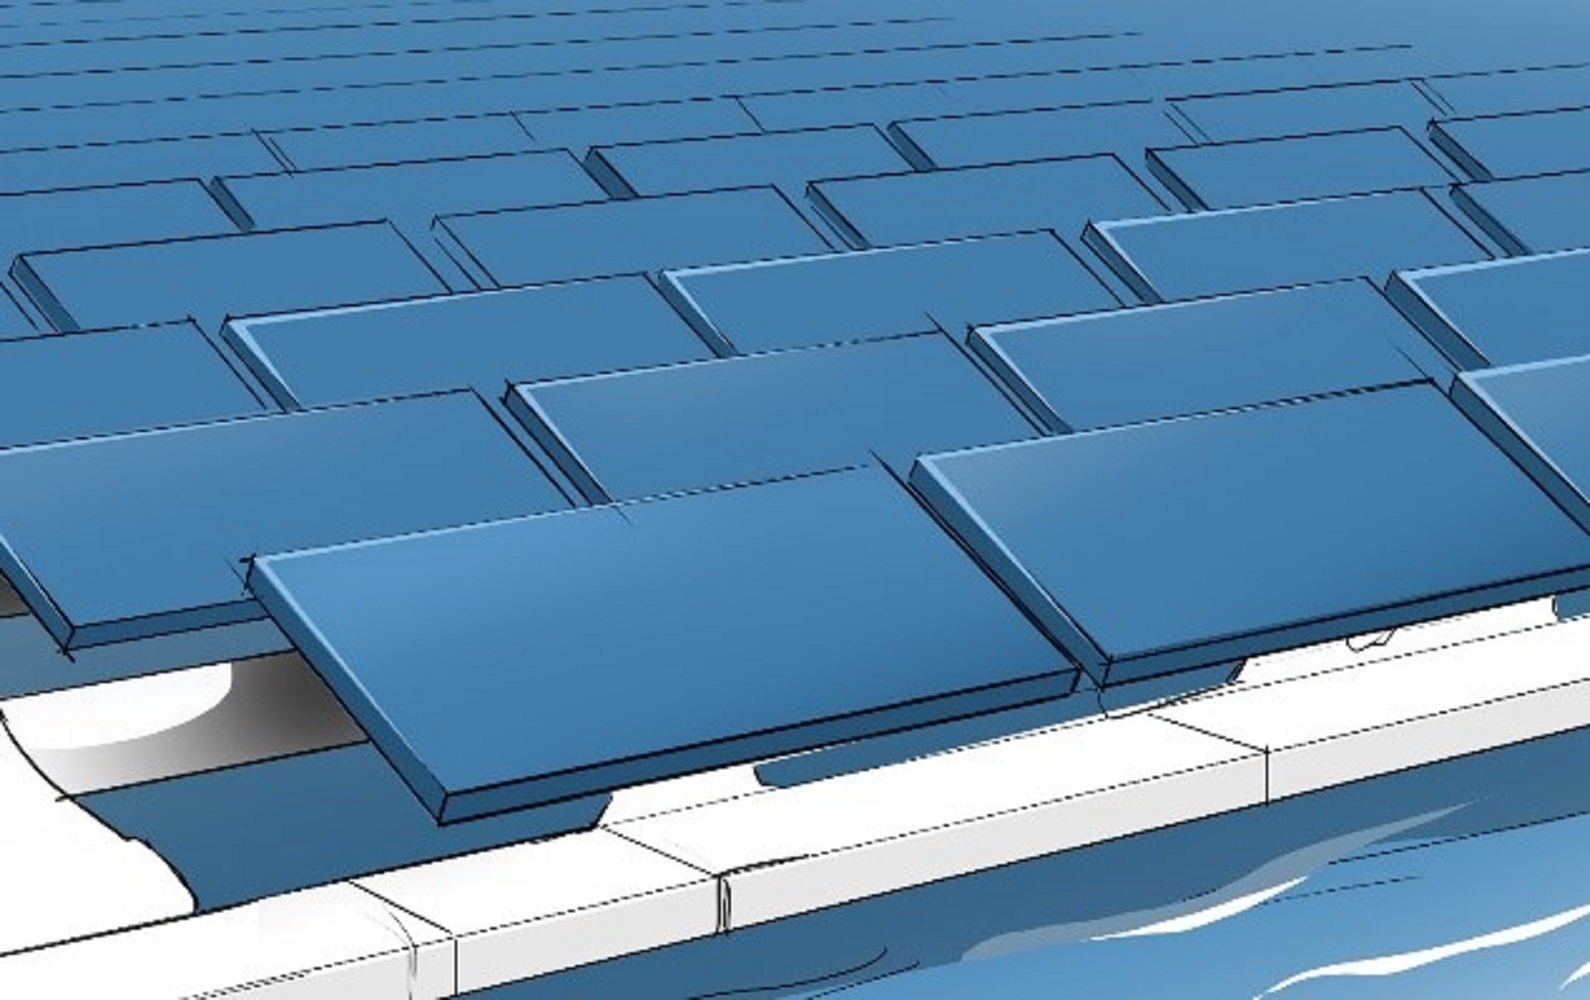 Example of a possible system design for floating PV.